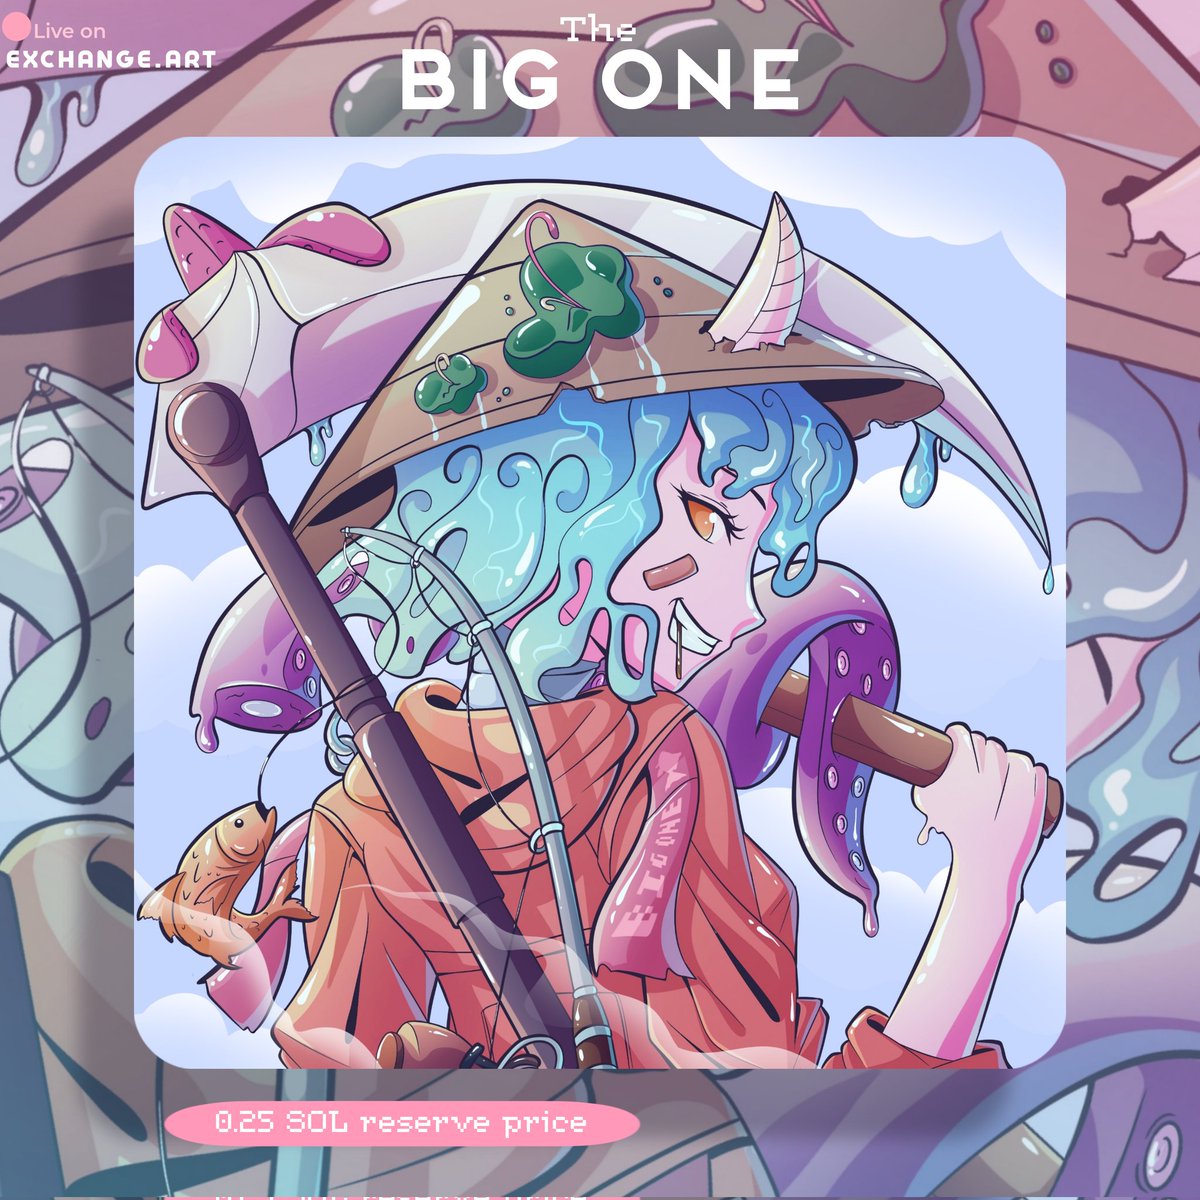 GM
Auction of AYEx #054 is live on @exchgART 

'The Big One'
 🐟 1/1 art
 🐟 0.25 $SOL reserve price
 🐟 24 hours

🔗 Link on the tweet below

Feel free to drop a bid fam! 
Happy bidding 💜

#NFT #NFTs #Akarayume #Solana #SolanaNFT #blamekato